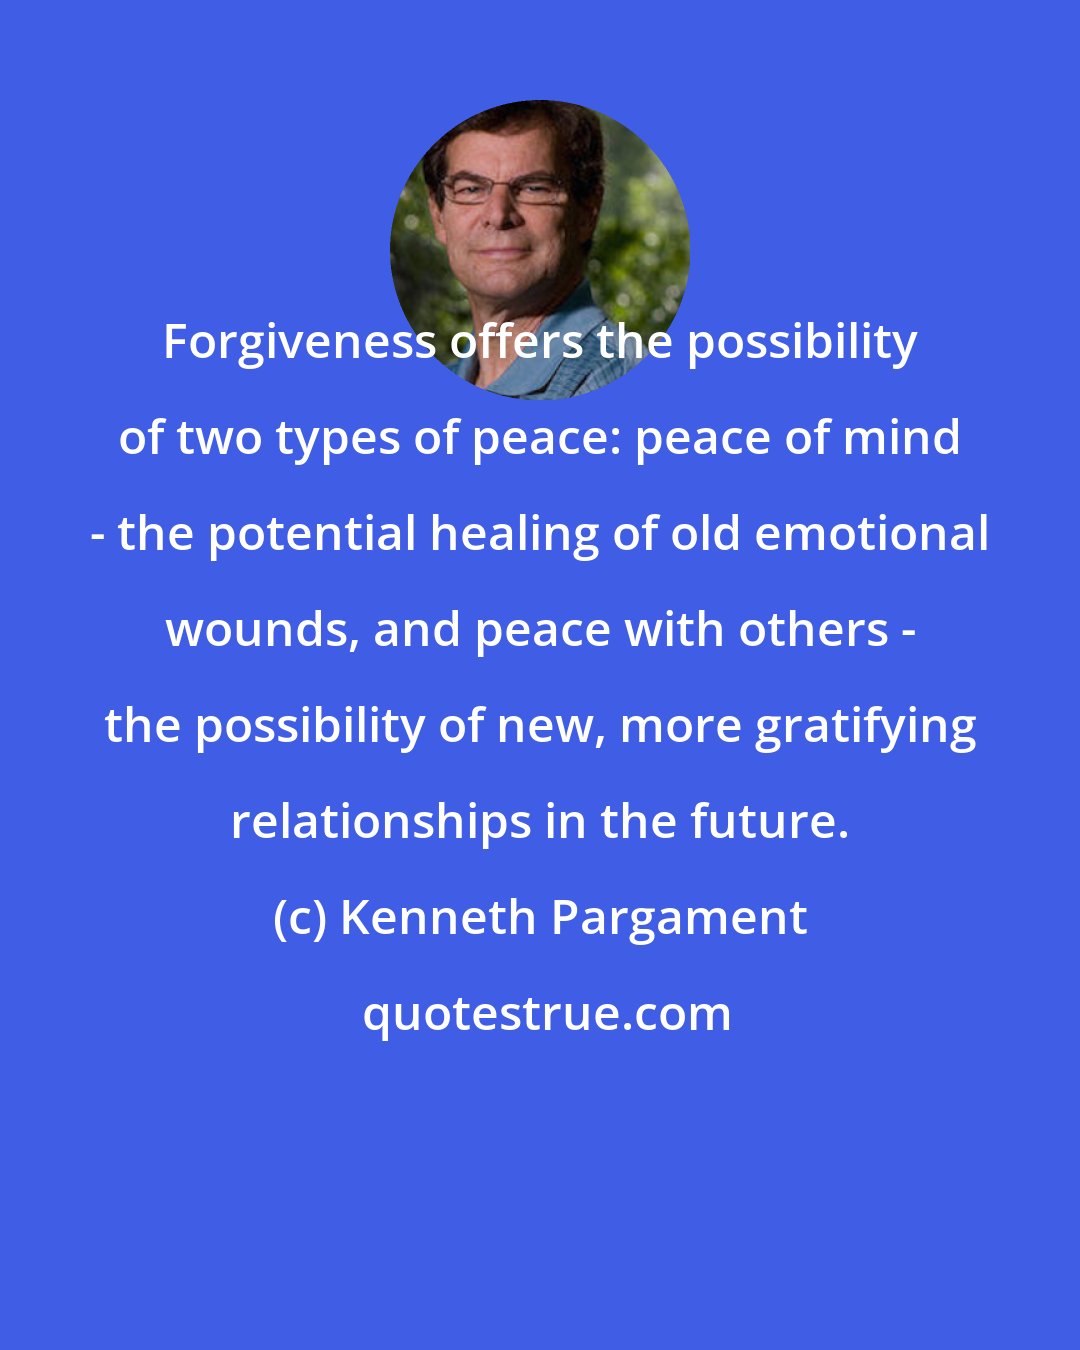 Kenneth Pargament: Forgiveness offers the possibility of two types of peace: peace of mind - the potential healing of old emotional wounds, and peace with others - the possibility of new, more gratifying relationships in the future.